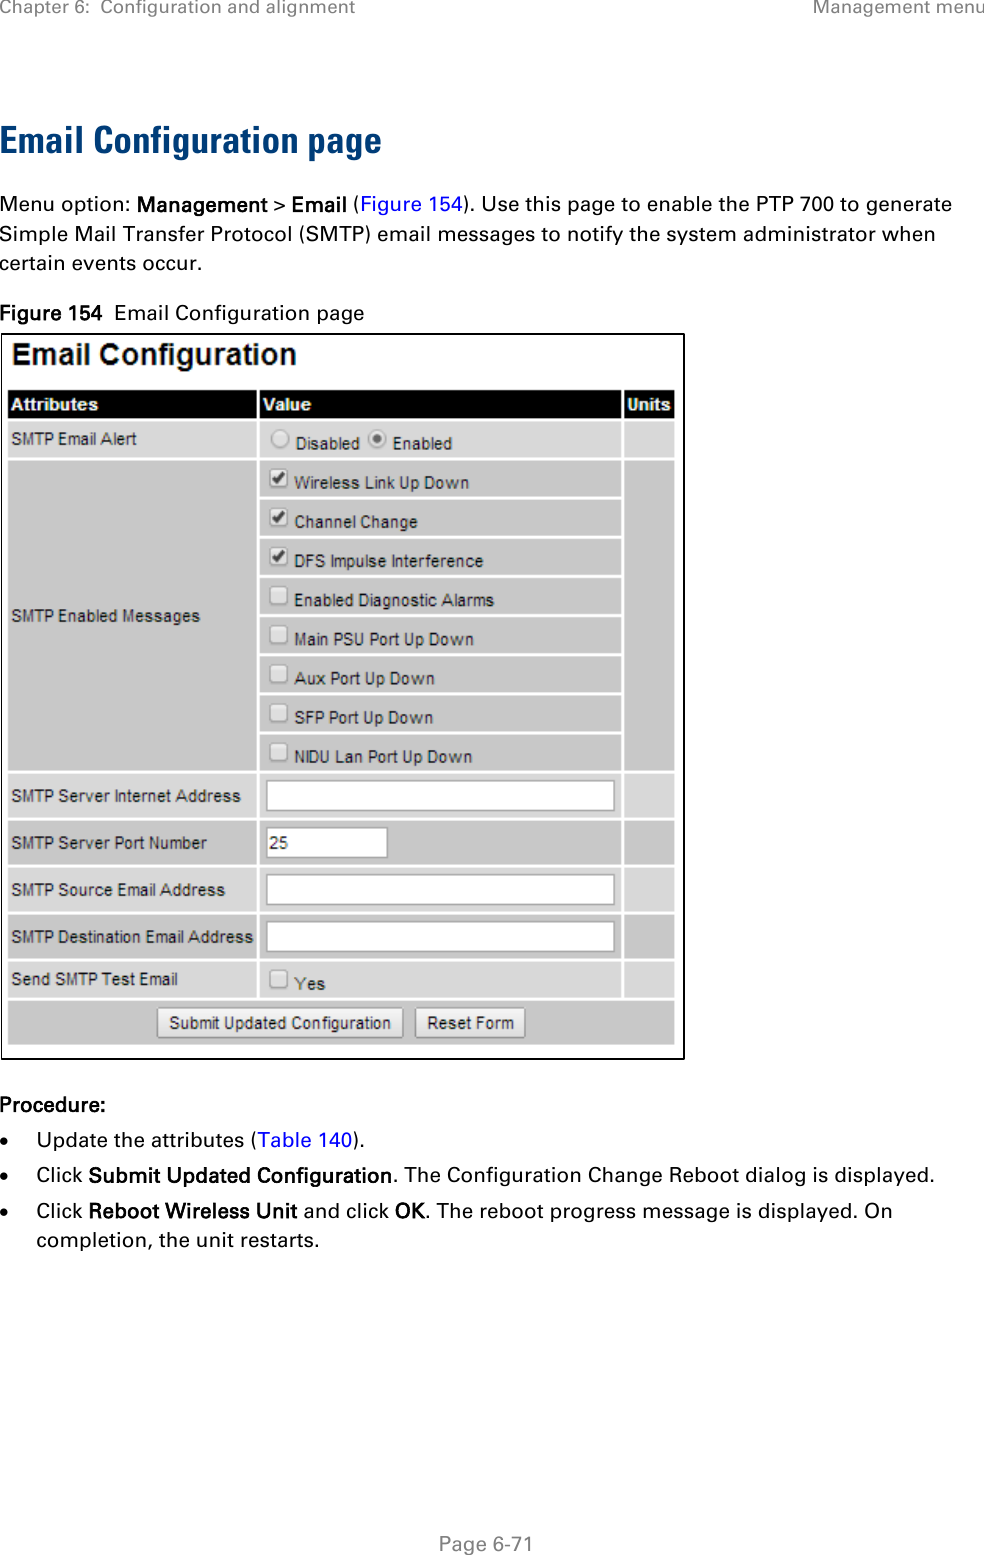 Chapter 6:  Configuration and alignment Management menu  Email Configuration page Menu option: Management &gt; Email (Figure 154). Use this page to enable the PTP 700 to generate Simple Mail Transfer Protocol (SMTP) email messages to notify the system administrator when certain events occur. Figure 154  Email Configuration page  Procedure: • Update the attributes (Table 140). • Click Submit Updated Configuration. The Configuration Change Reboot dialog is displayed. • Click Reboot Wireless Unit and click OK. The reboot progress message is displayed. On completion, the unit restarts.     Page 6-71 